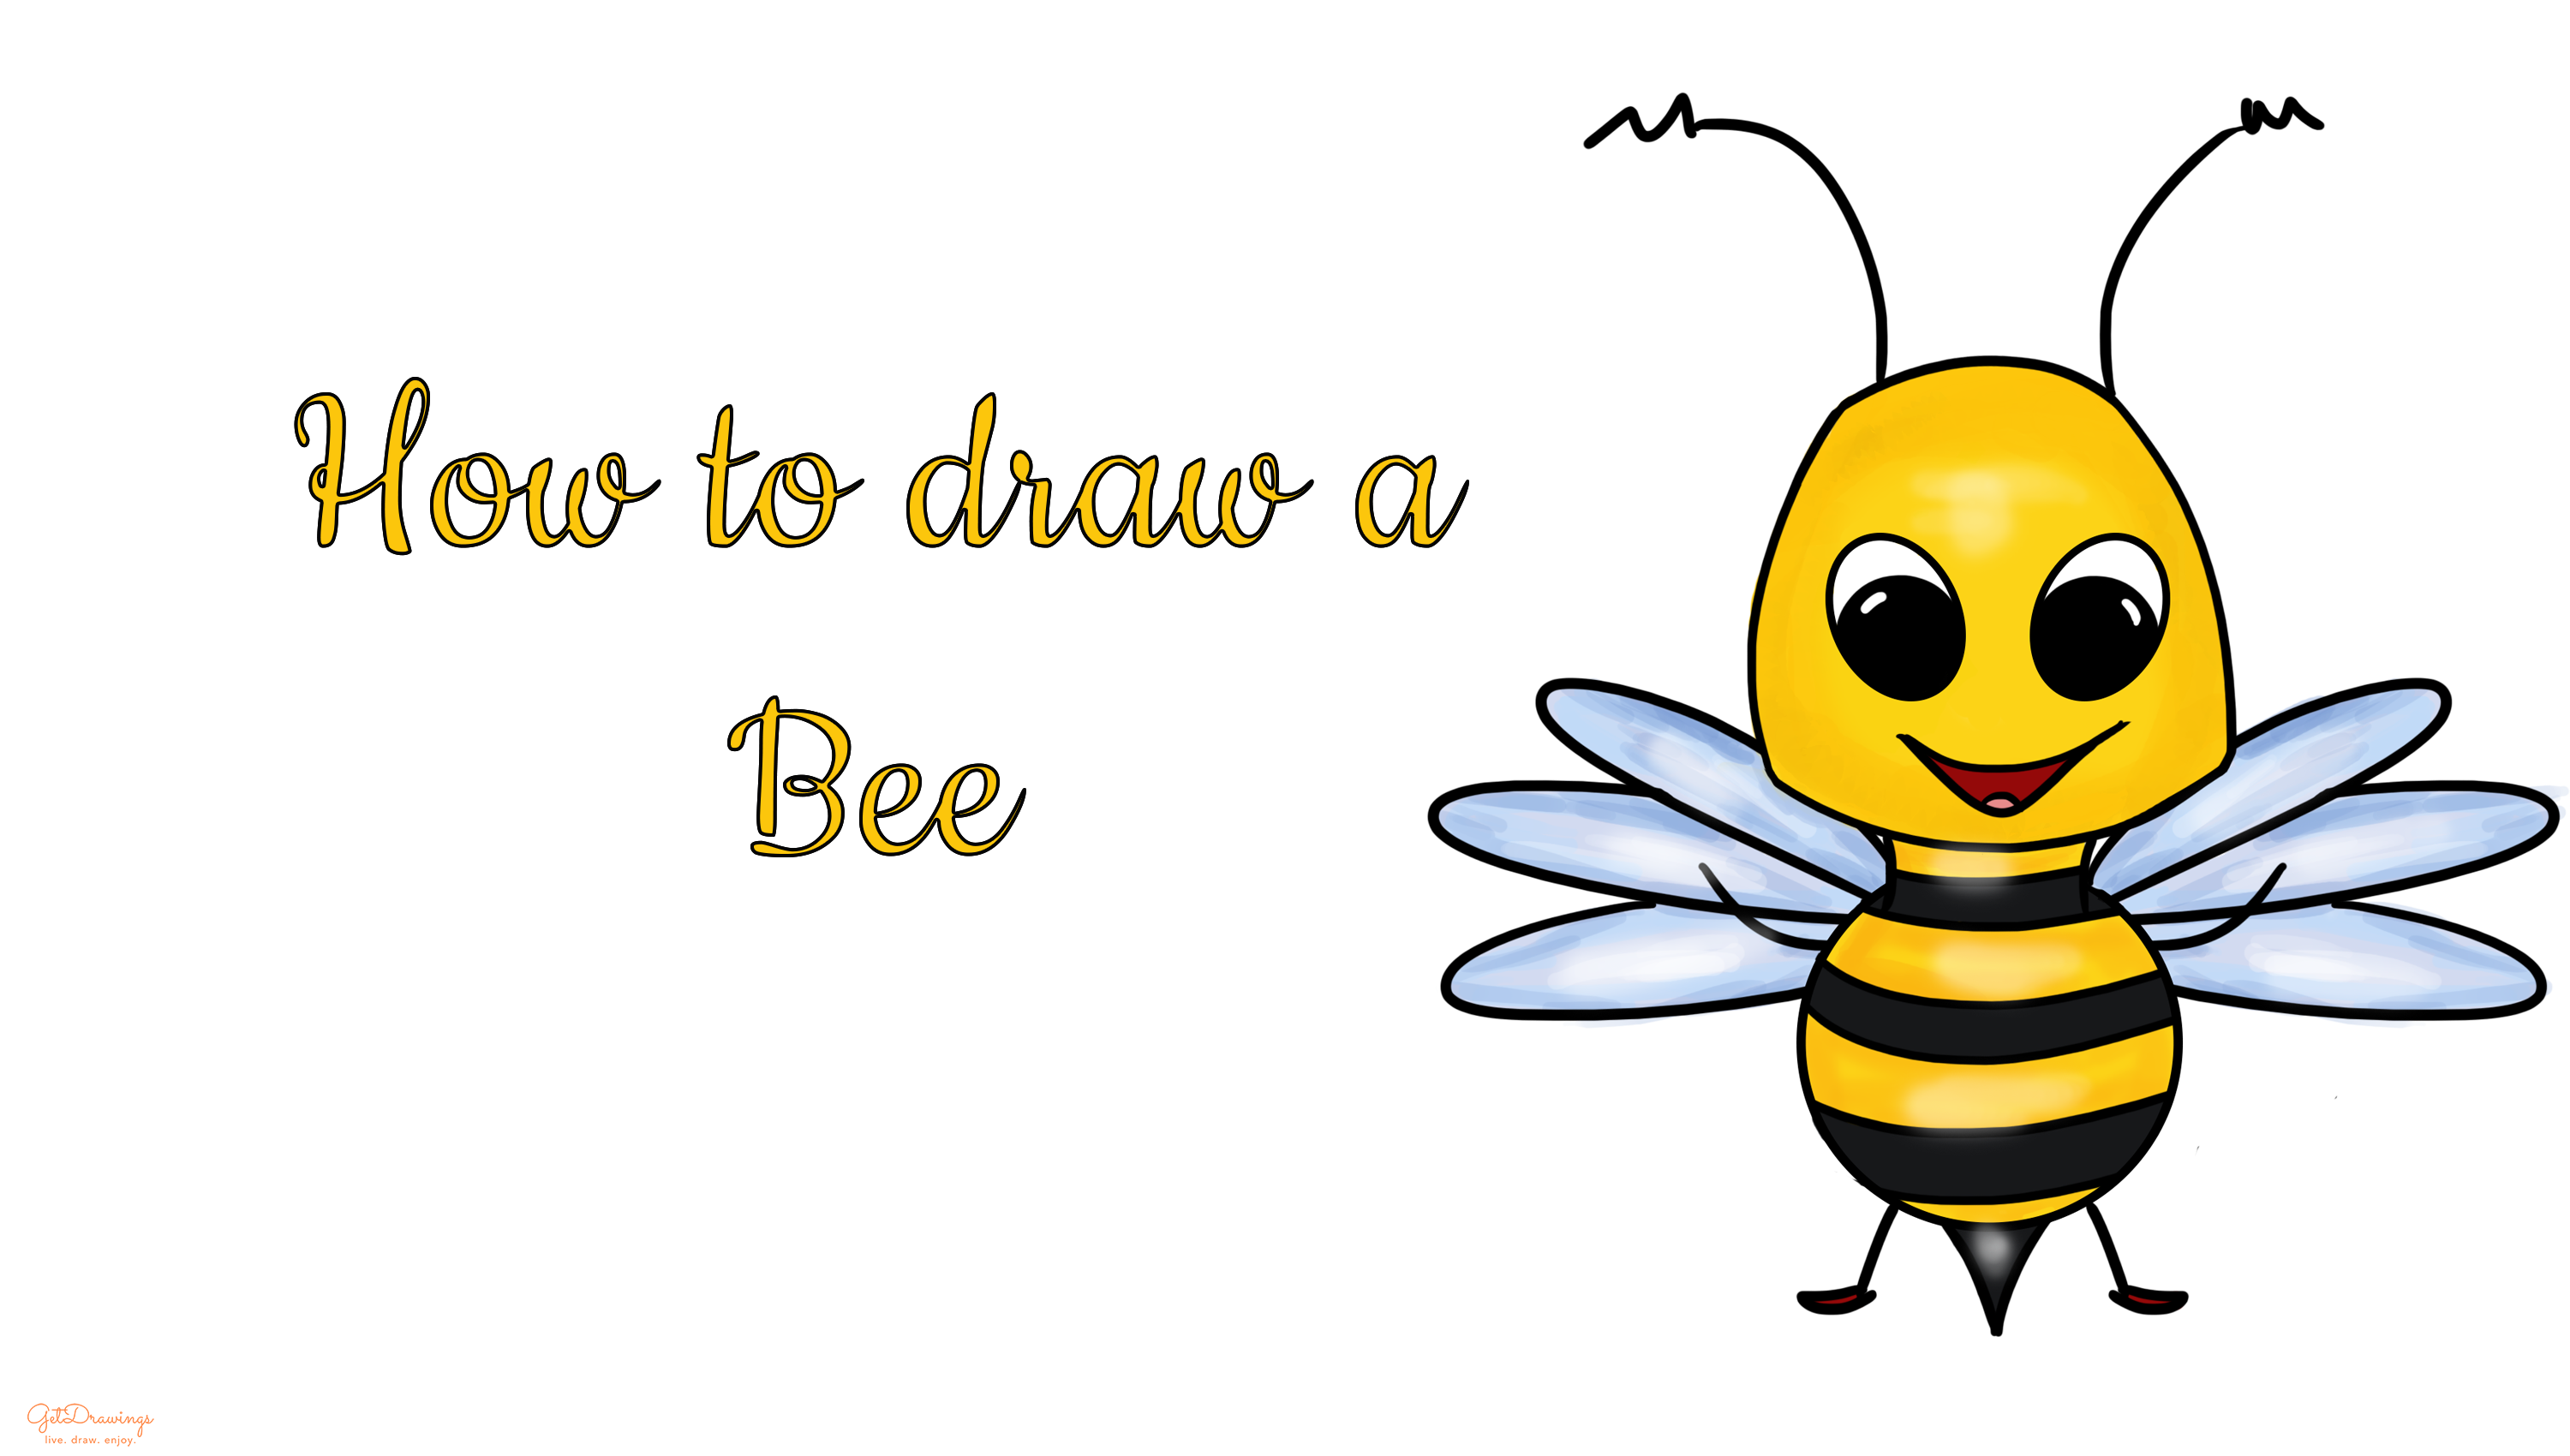 How to draw a Bee?